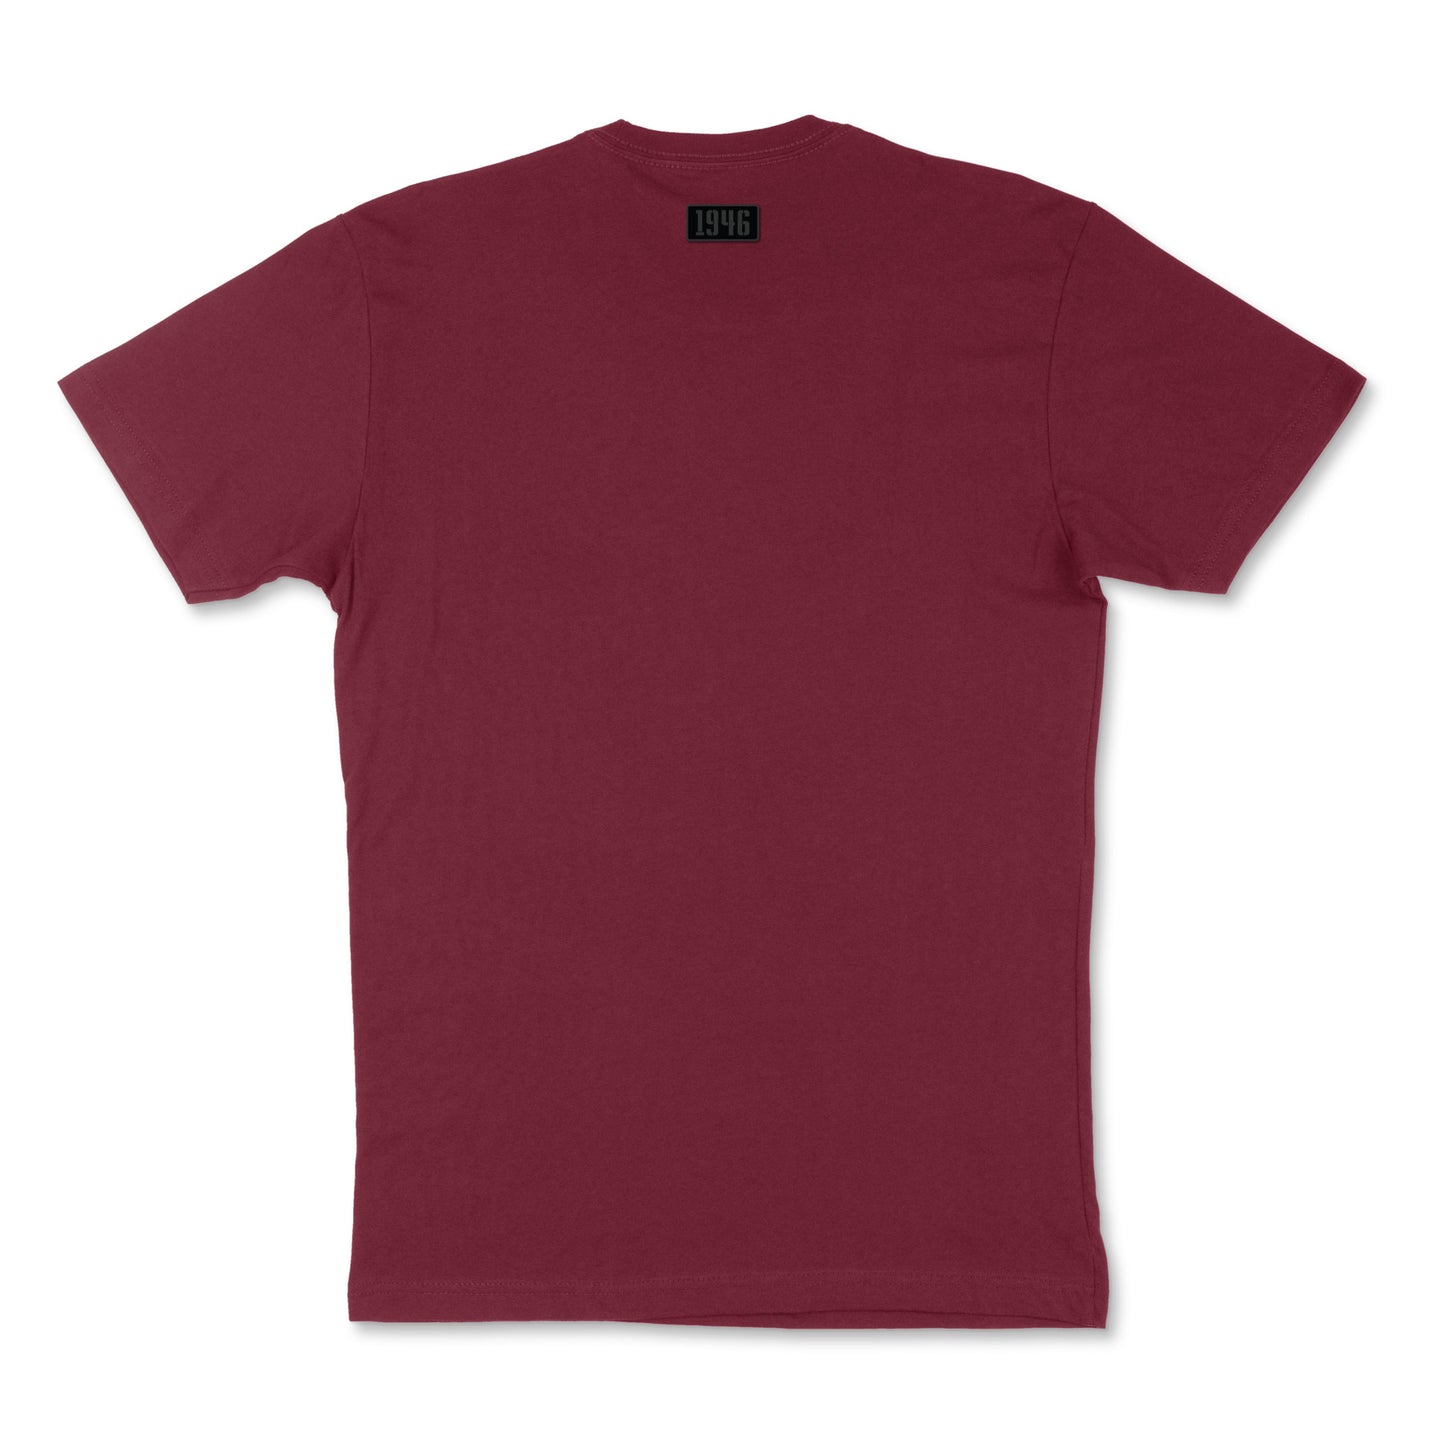 STL x FKS City Collection Tee